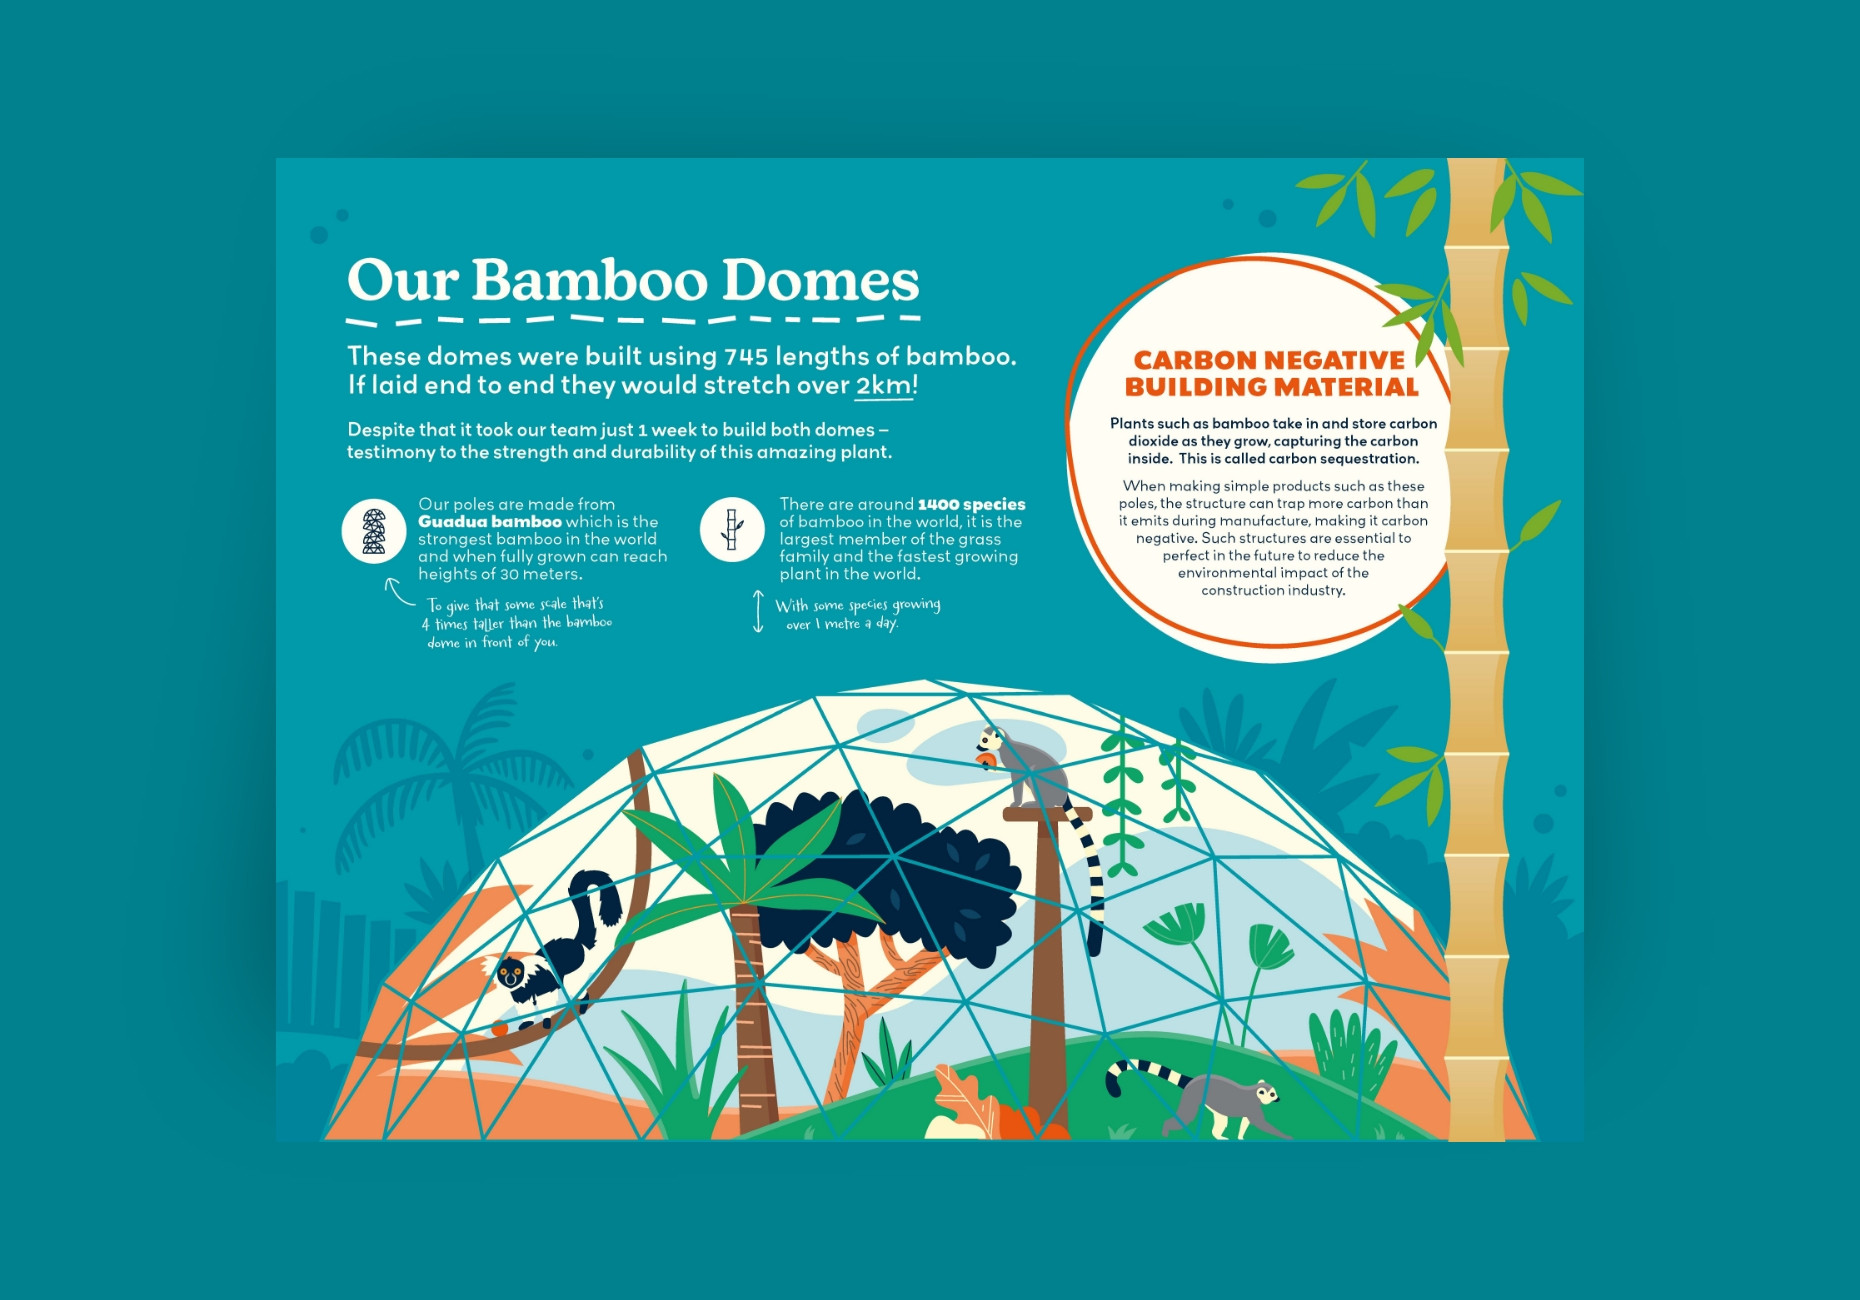 Wildheart Animal Sanctuary zoo bamboo dome illustration by Root Studio